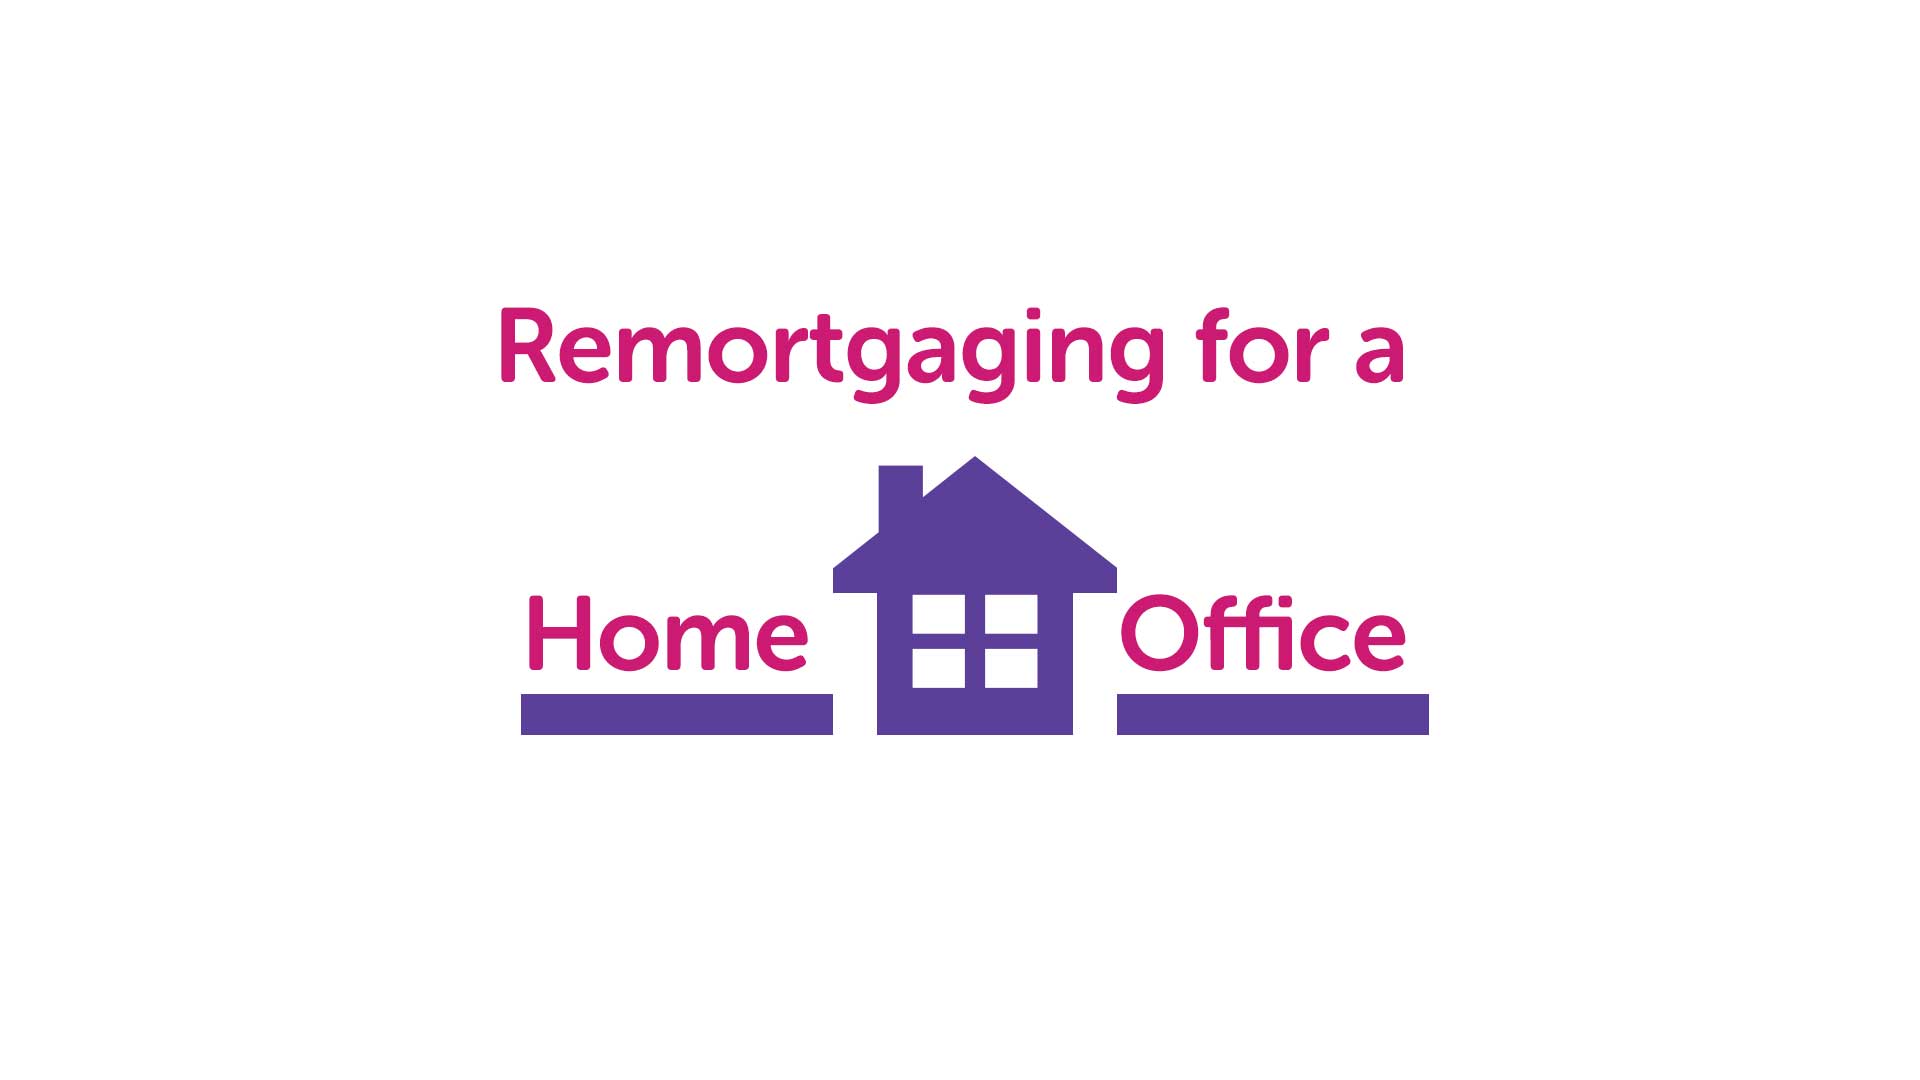 Remortgage for a Home Office in Sunderland